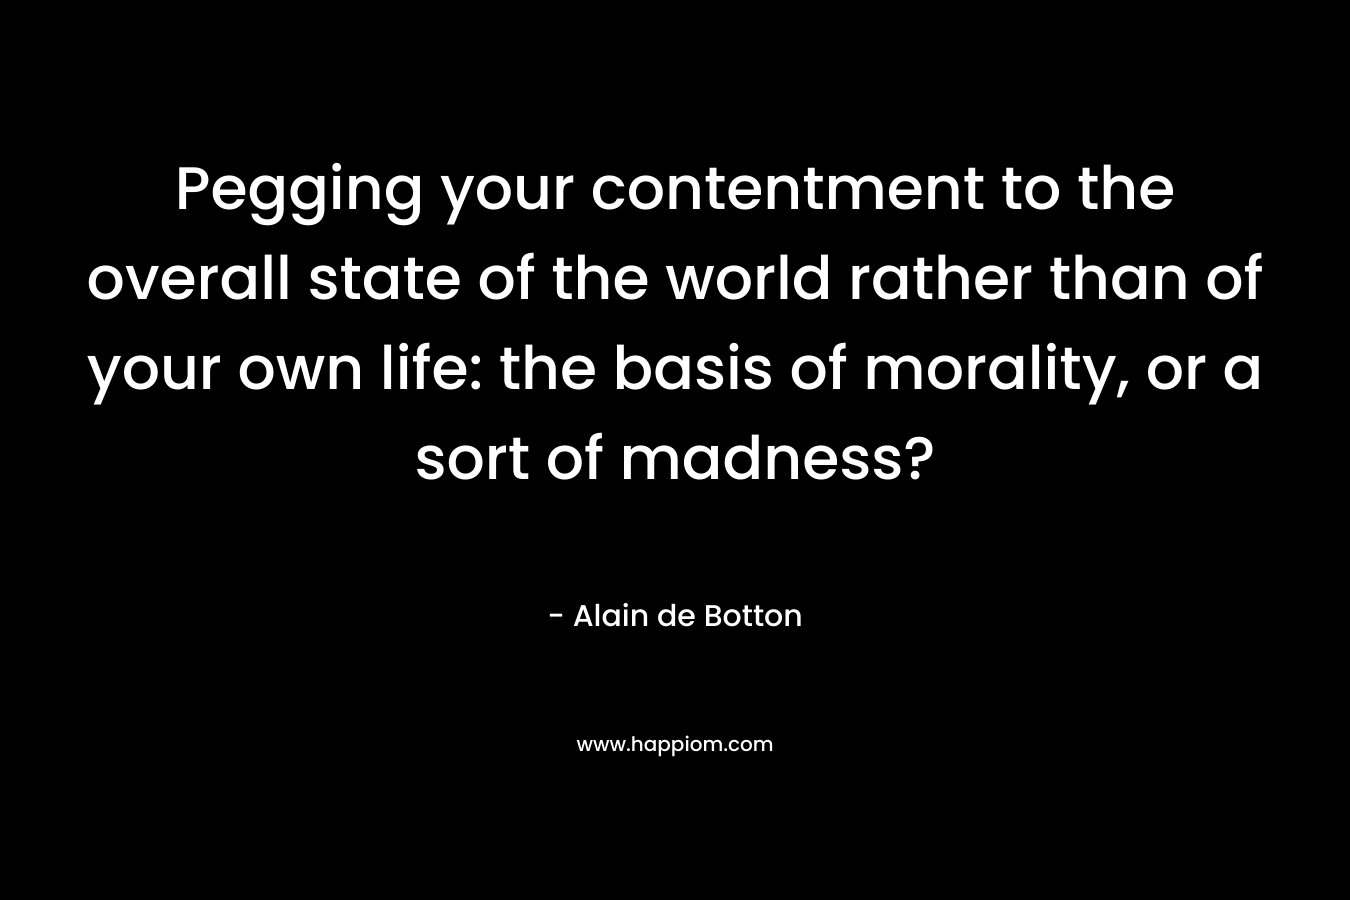 Pegging your contentment to the overall state of the world rather than of your own life: the basis of morality, or a sort of madness?